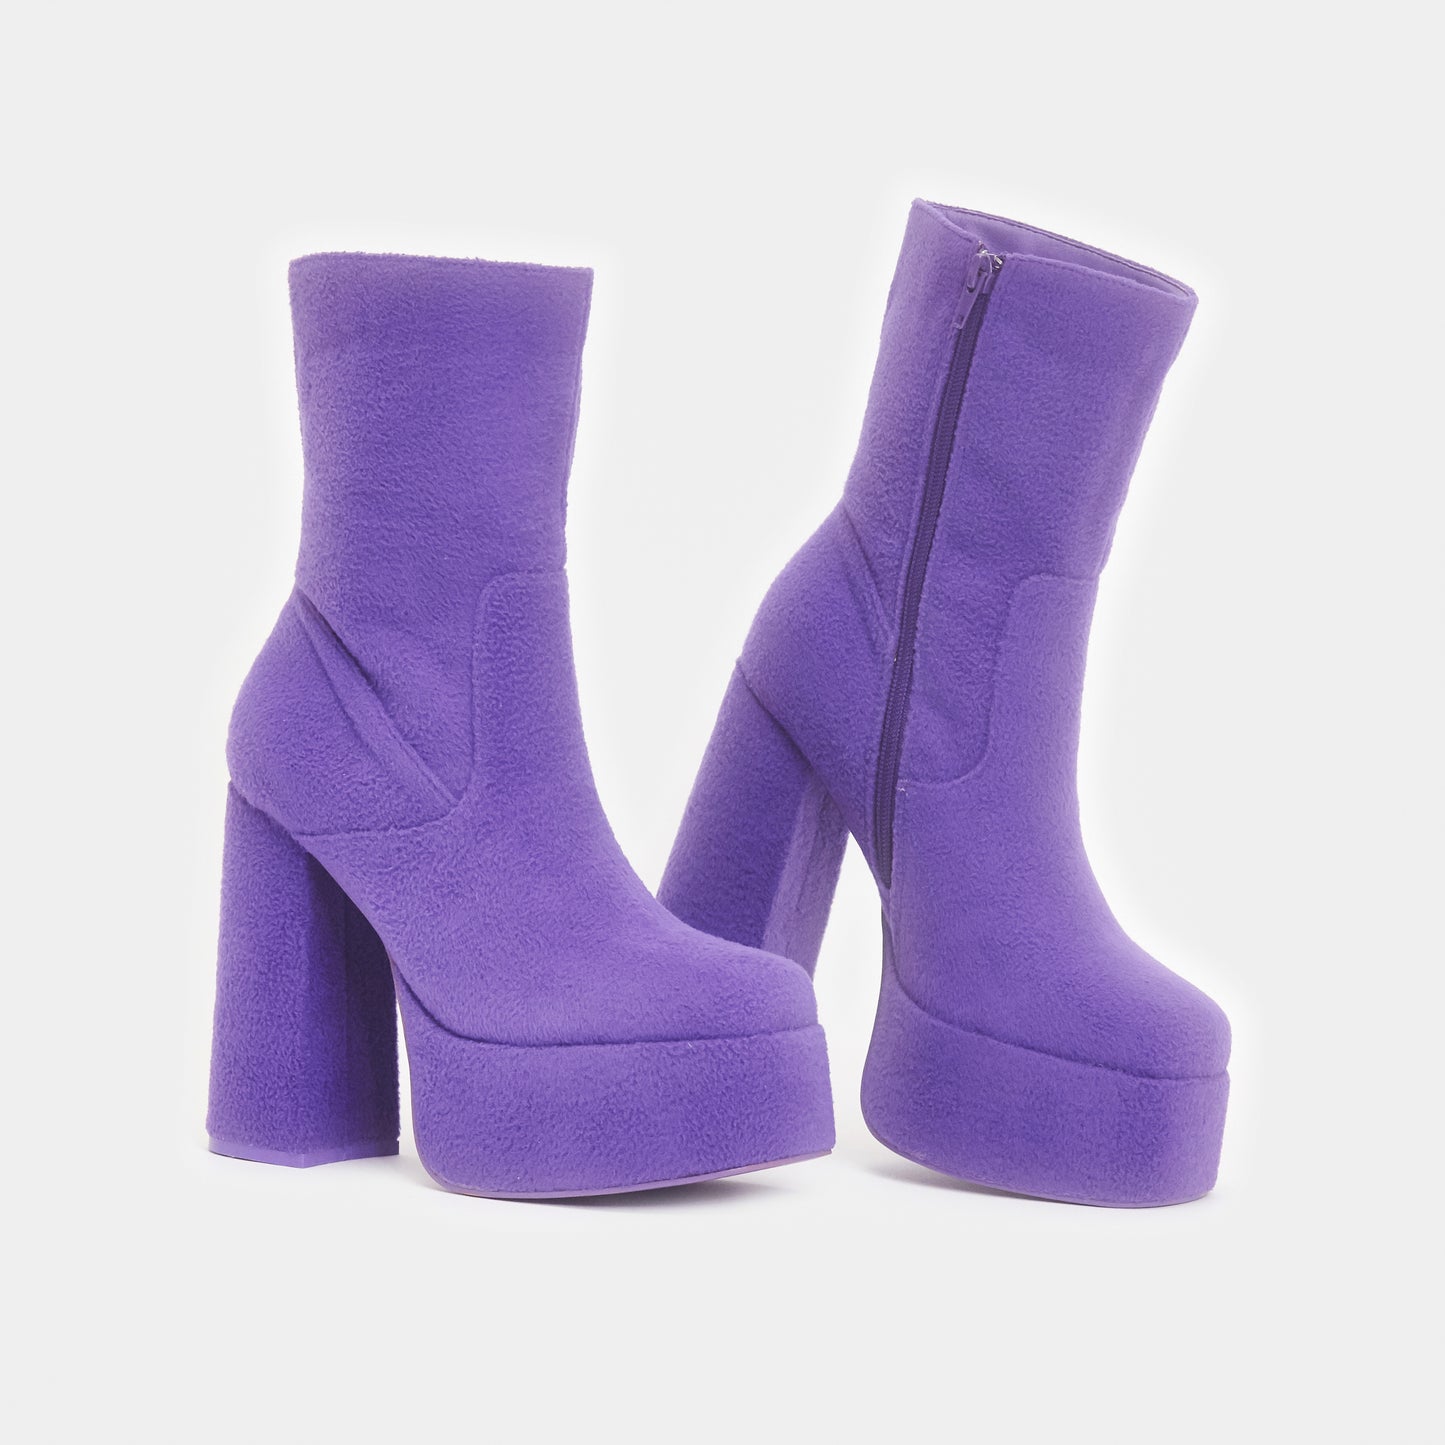 Tinky Winky Fluffy Platform Boots - Ankle Boots - KOI Footwear - Purple - Three-Quarter View